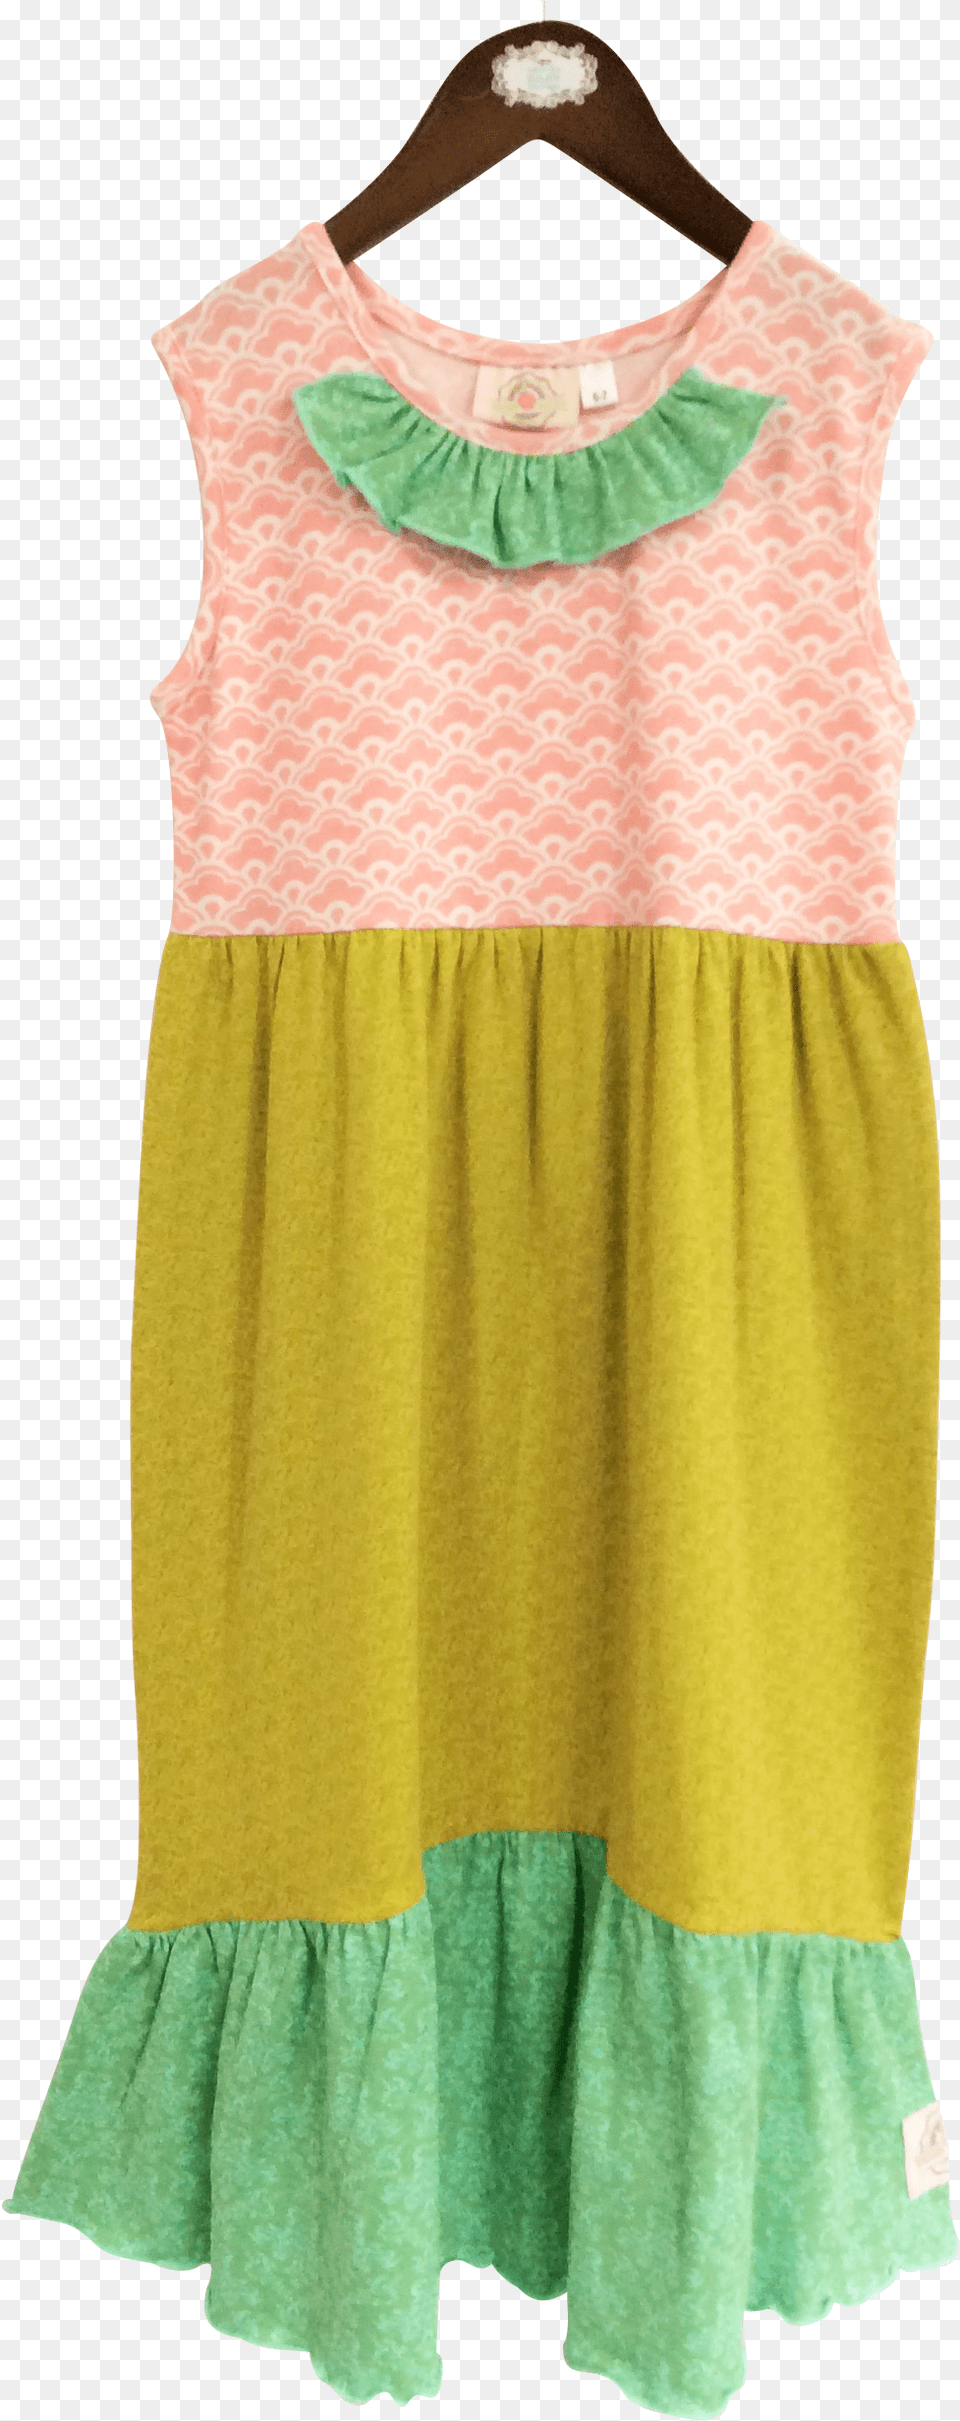 Day Dress, Blouse, Clothing, Skirt Png